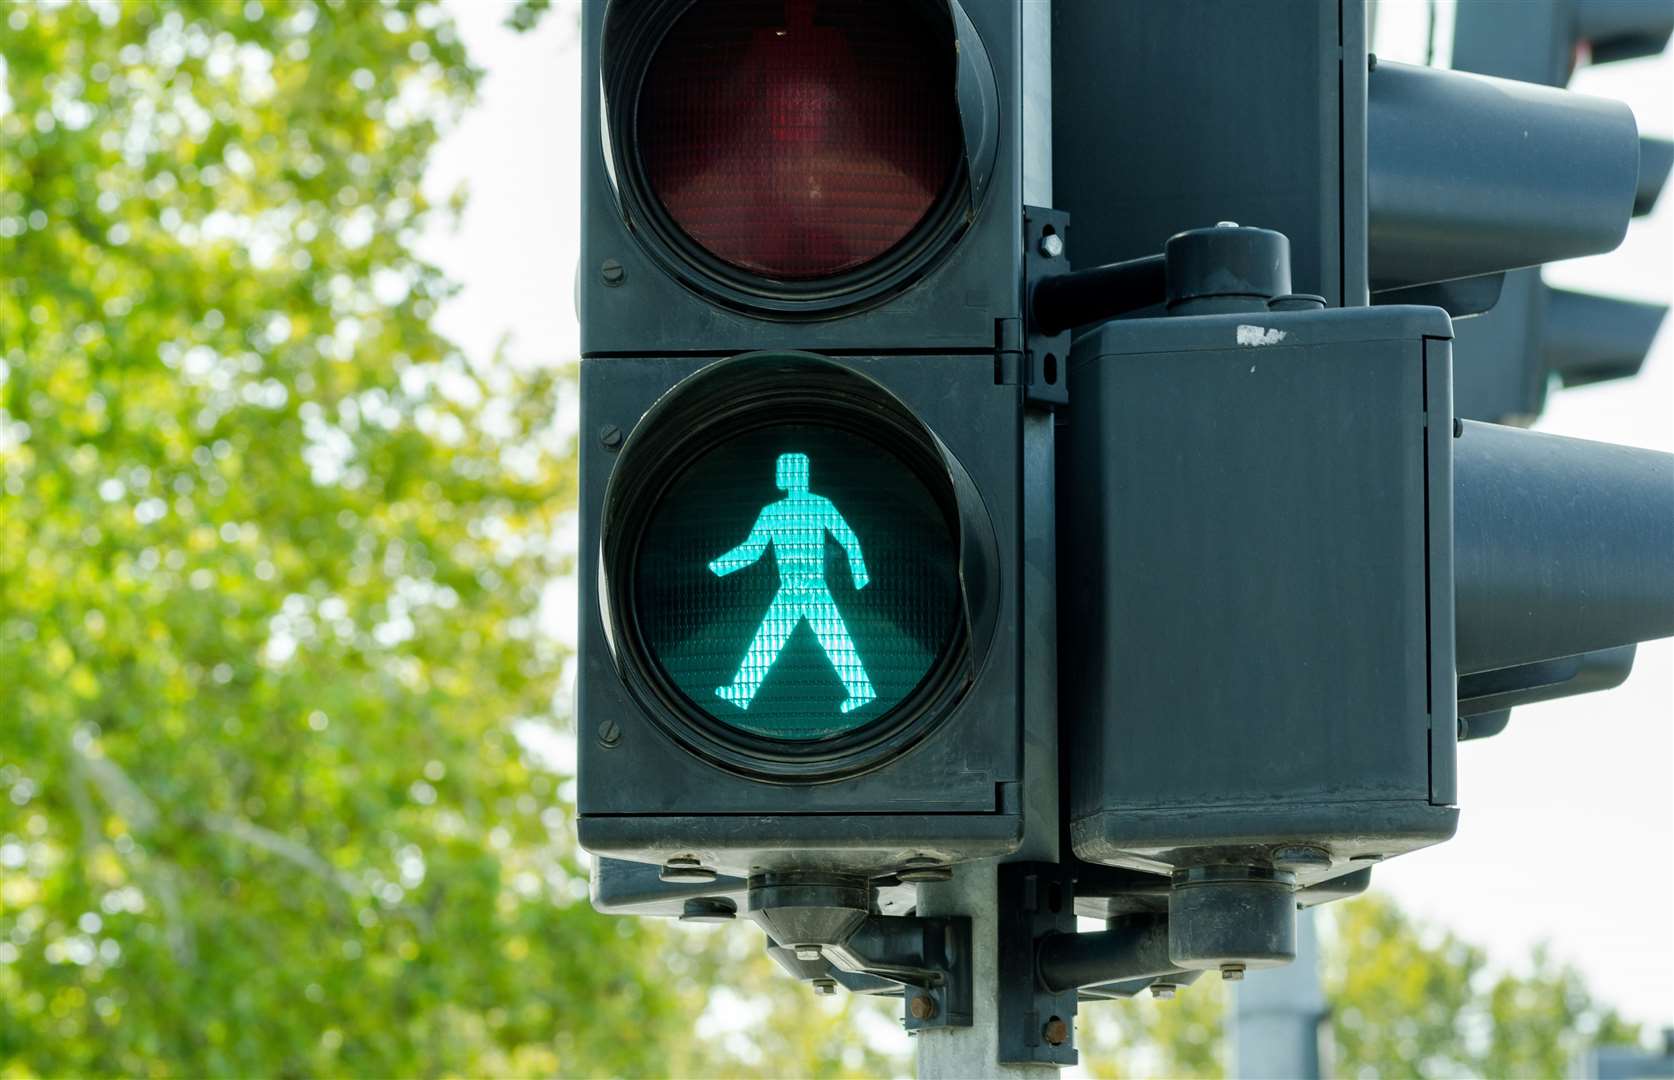 More than a second could be added to crossing times to help pedestrians cross comfortably. Image: iStock.